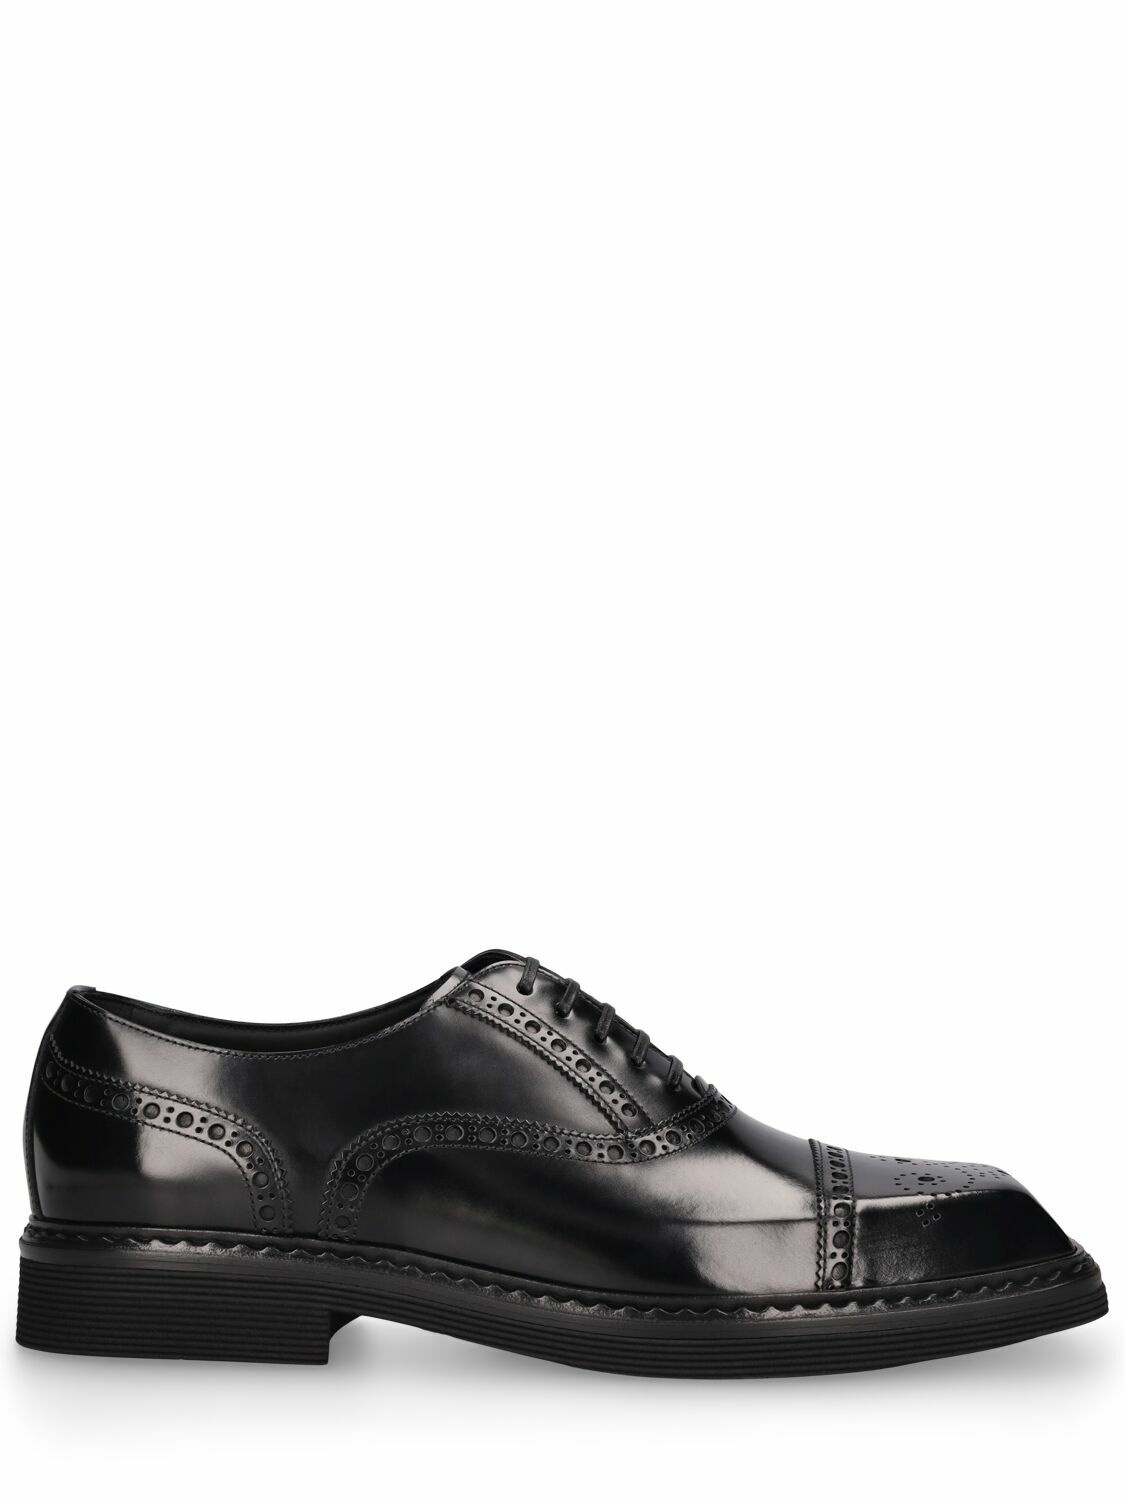 Photo: DOLCE & GABBANA - City Trek Squared Derby Lace-up Shoes